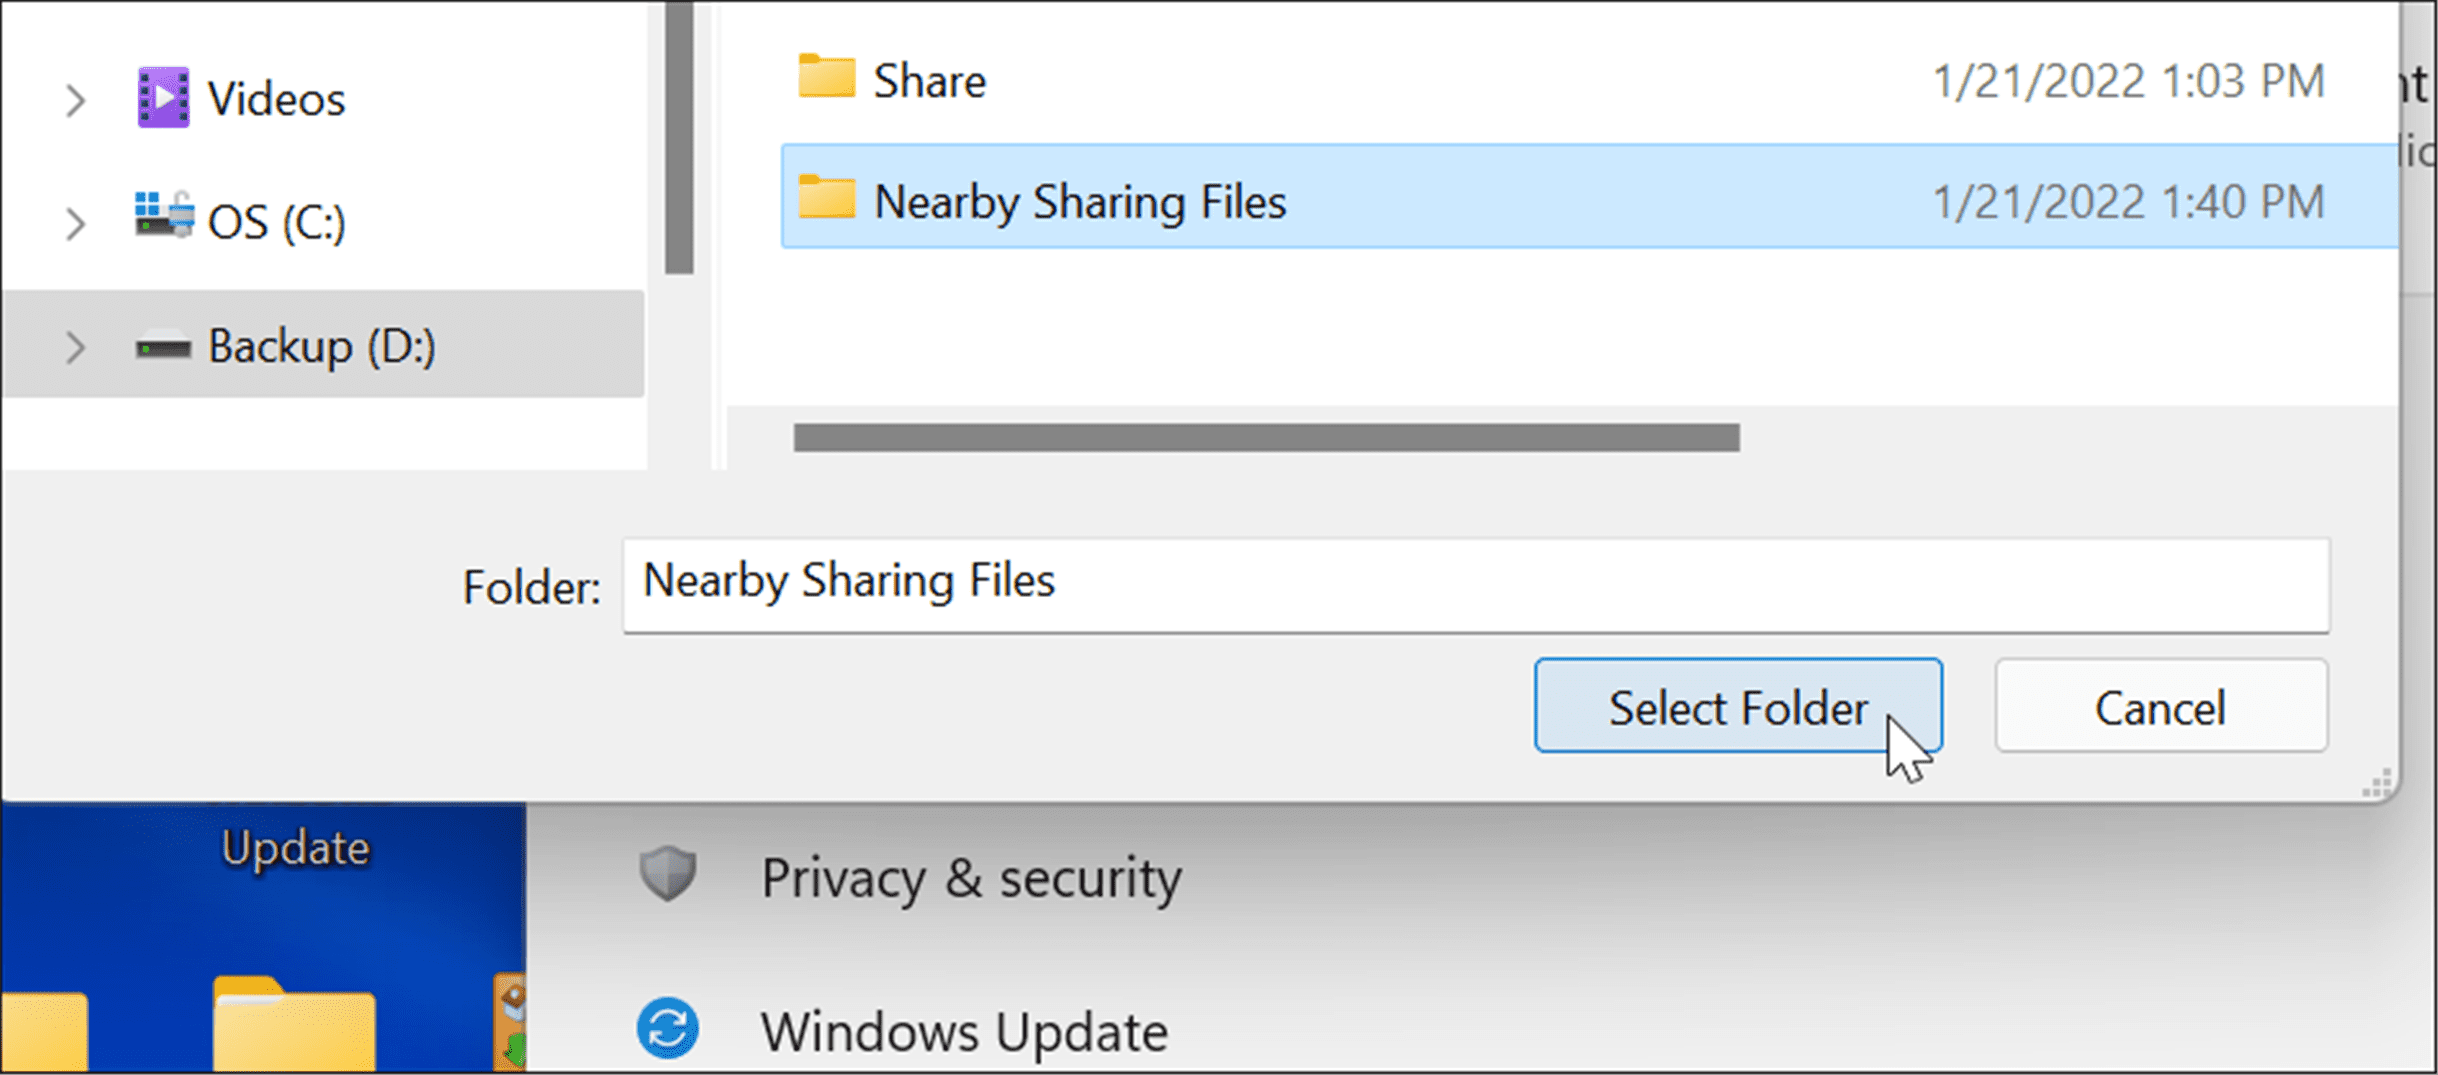 Select new nearby sharing folder